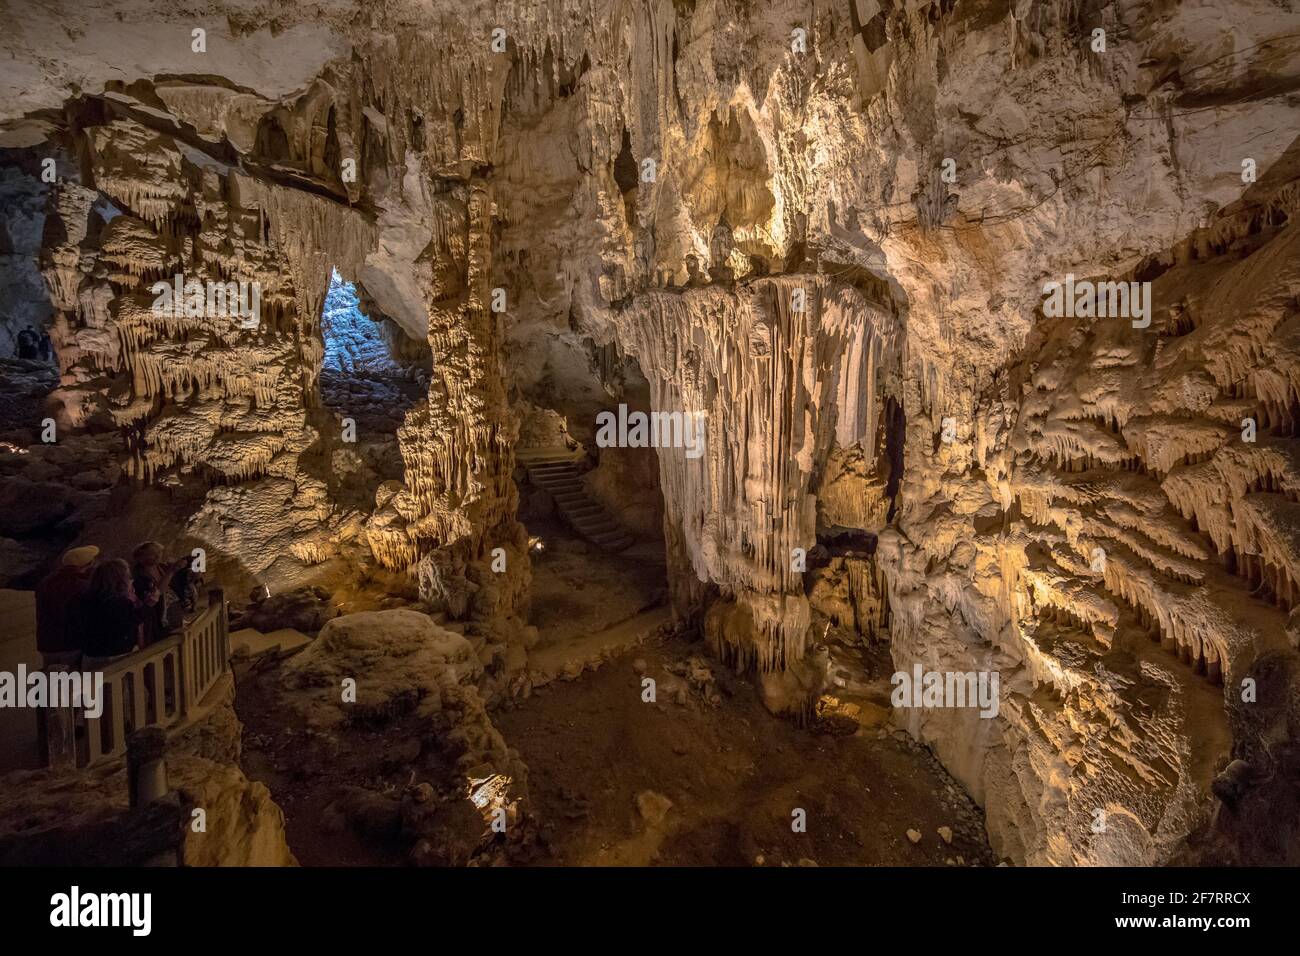 Dripstone caves Grotte des Demoiselles in Languedoc Southern France Stock Photo